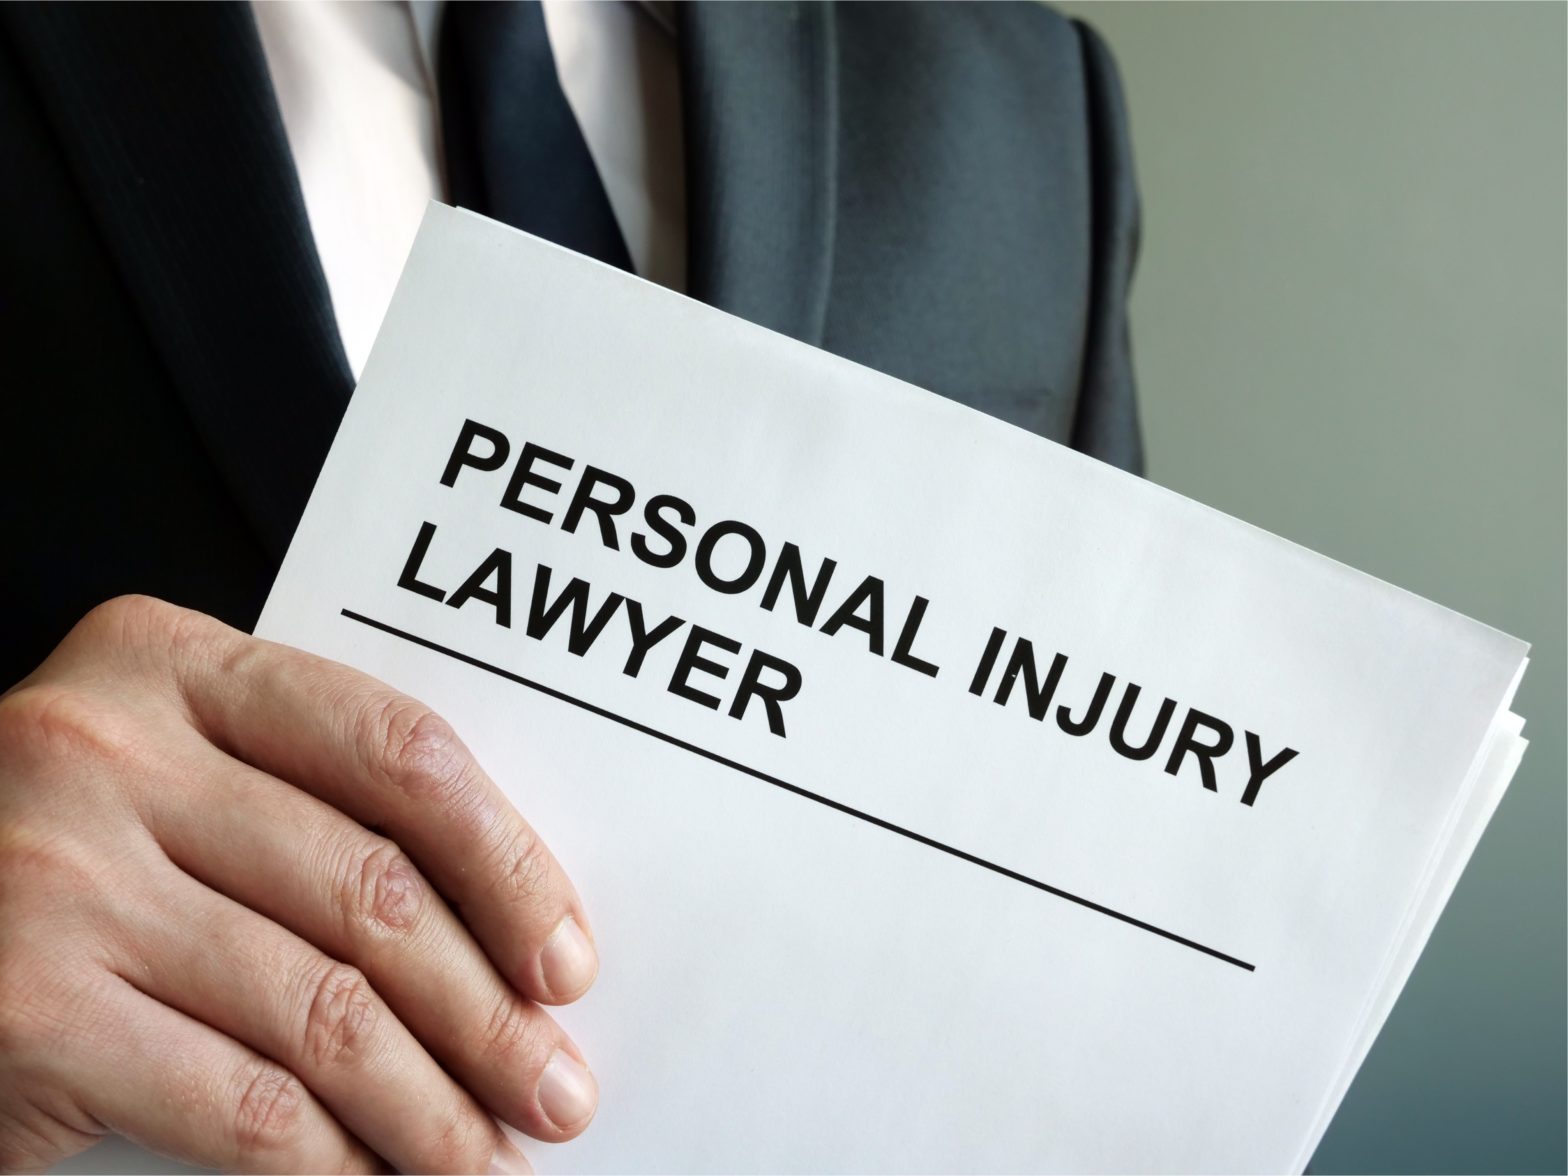 baumgartnerlawyers.com/wp-content/uploads/2017/04/Why-a-Personal-Injury-Lawyer-Will-Not-Take-Your-Case-1568x1176.jpg